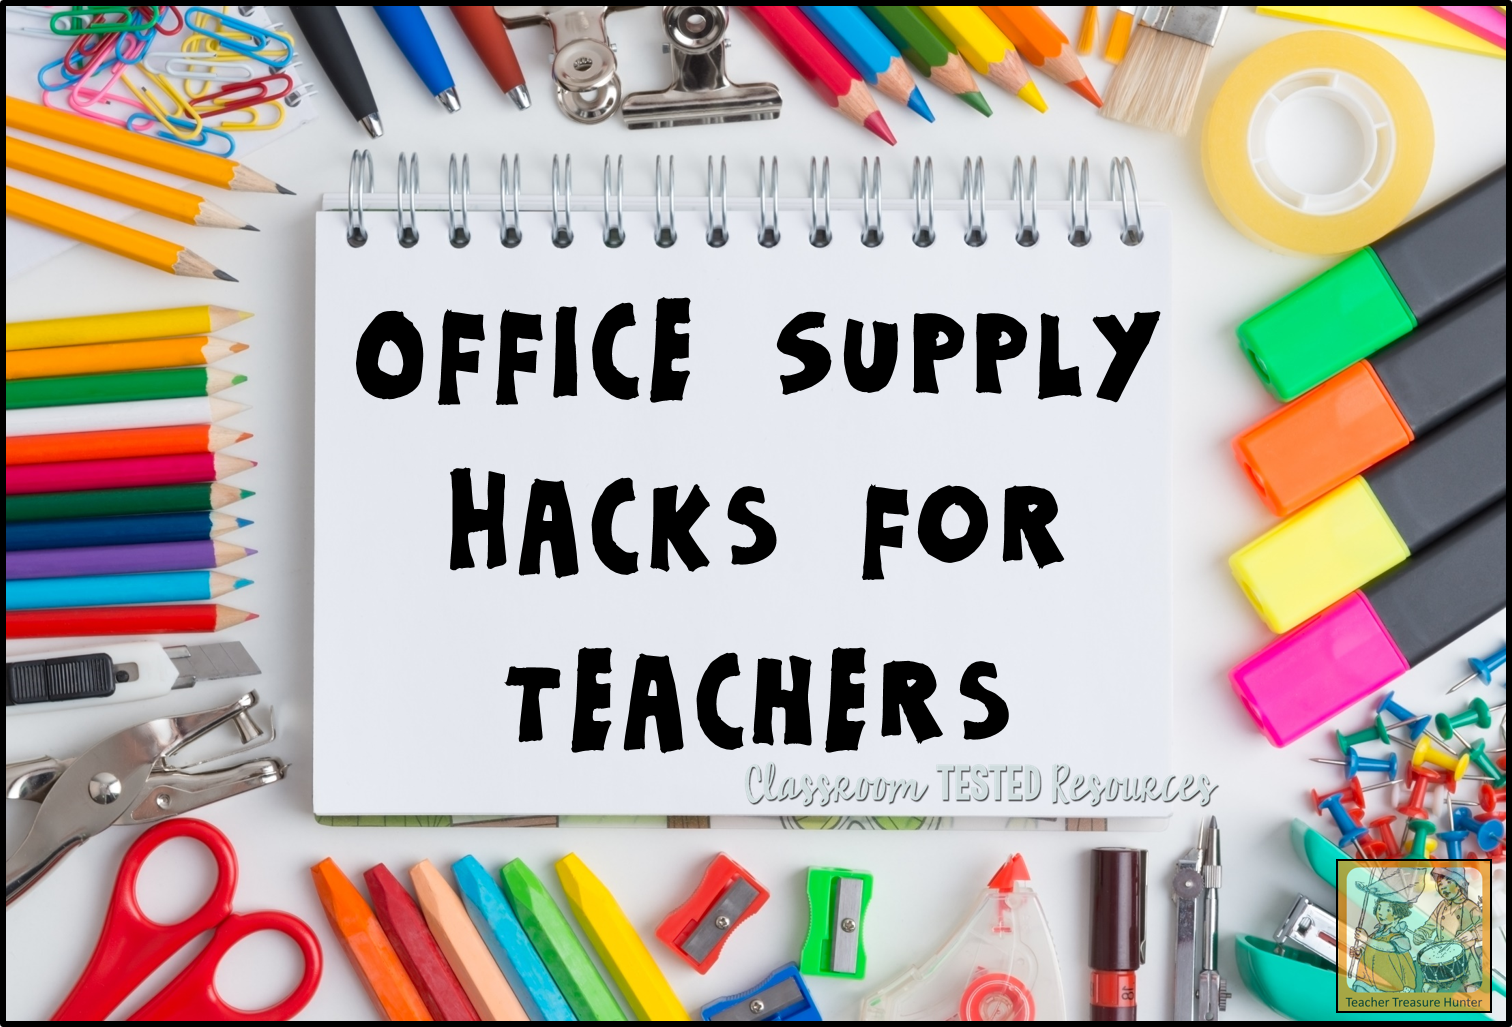 Office Supply Hacks for Teachers and a FREEBIE | Classroom Tested Resources